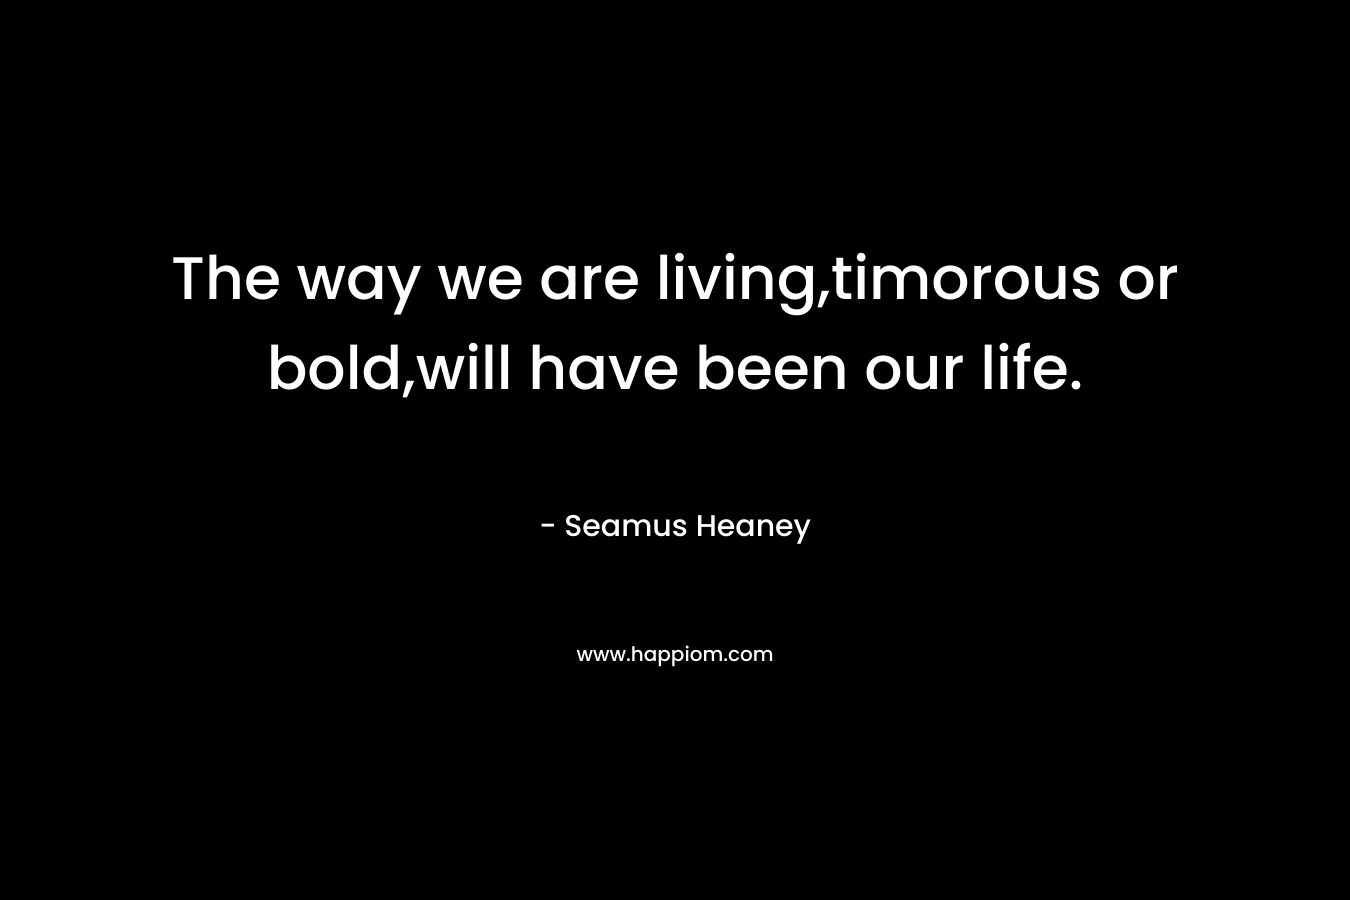 The way we are living,timorous or bold,will have been our life. – Seamus Heaney